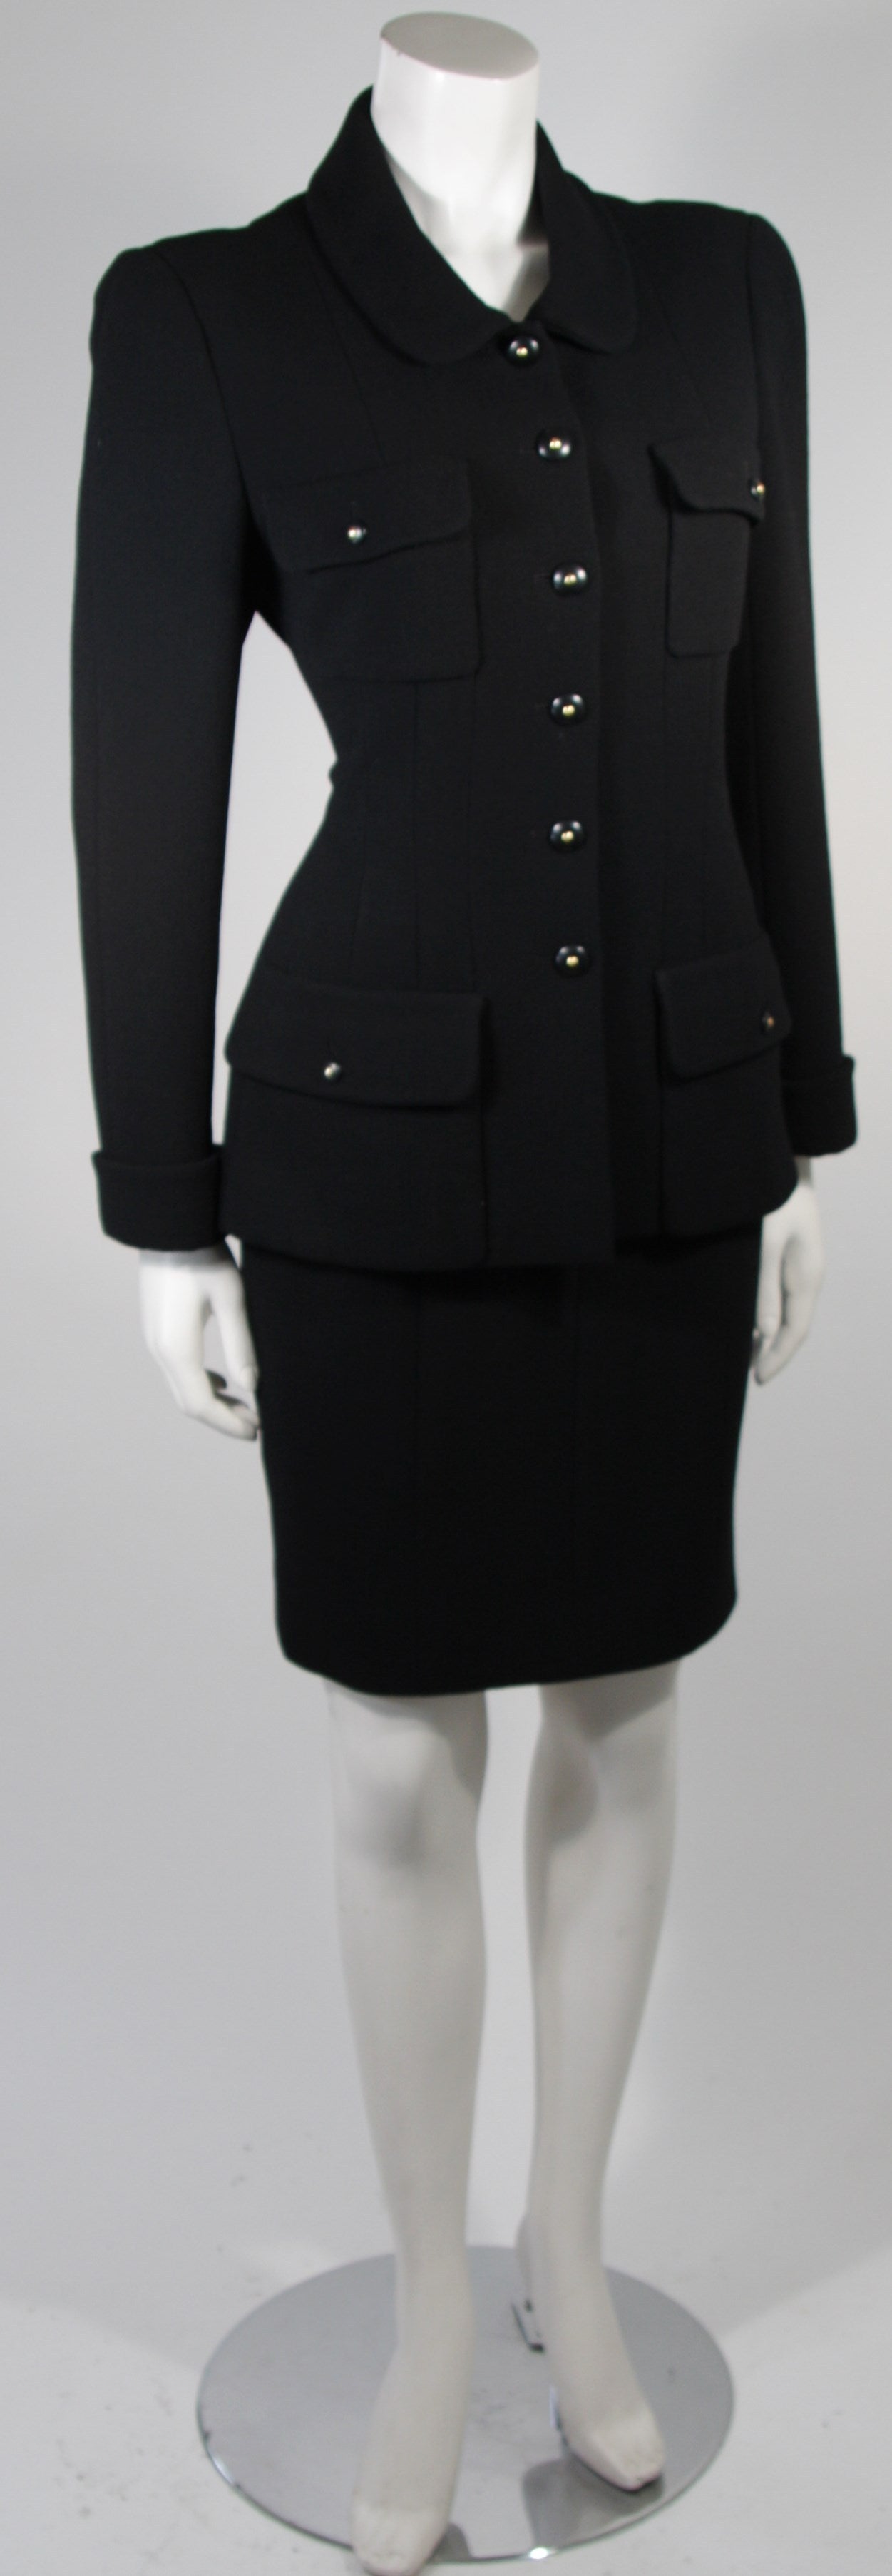 Women's Chanel Black Wool Skirt Suit Size Military Inspired with Peter Pan Collar sz 8